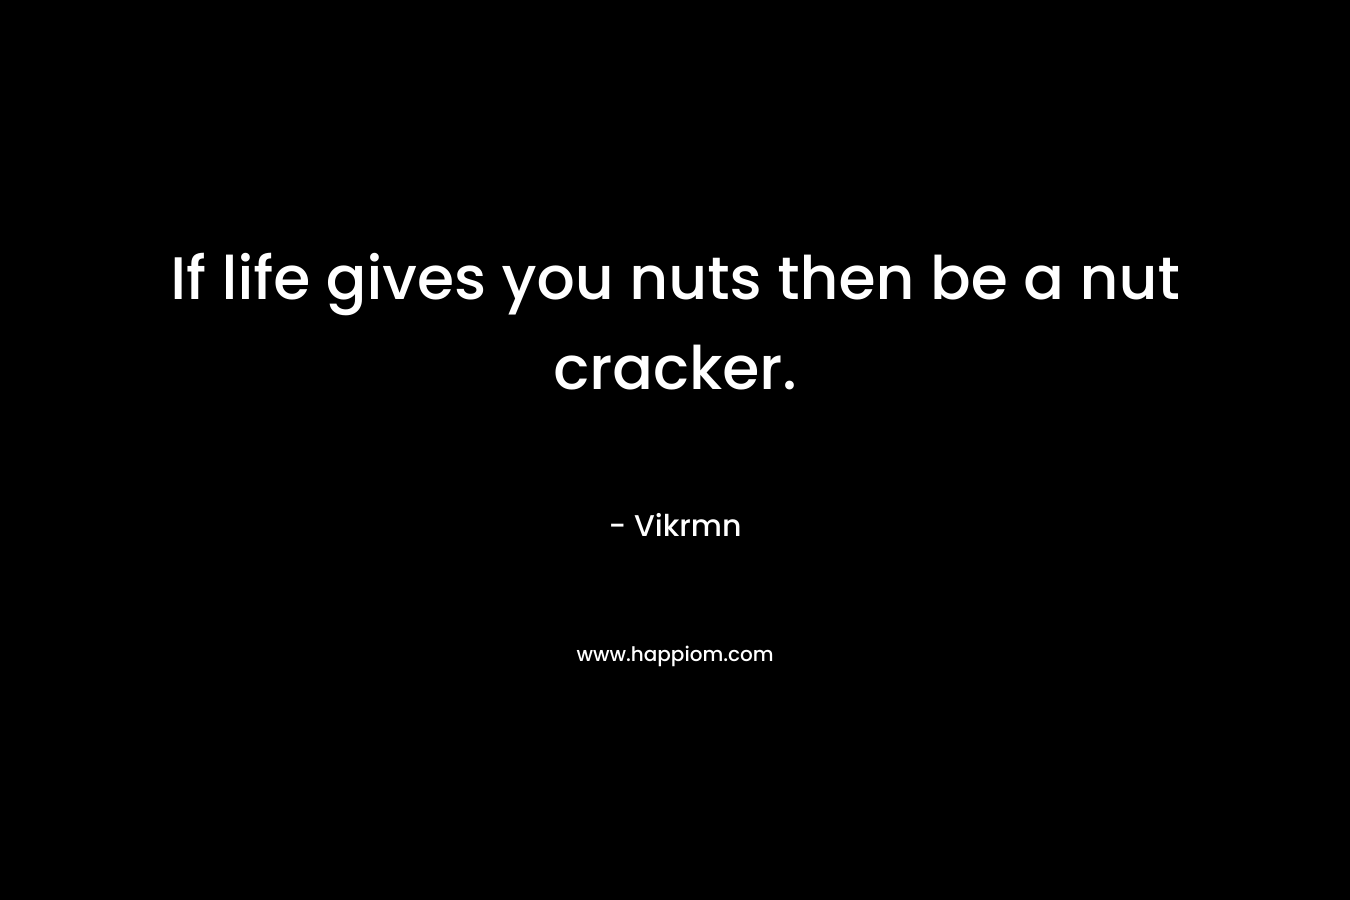 If life gives you nuts then be a nut cracker. – Vikrmn